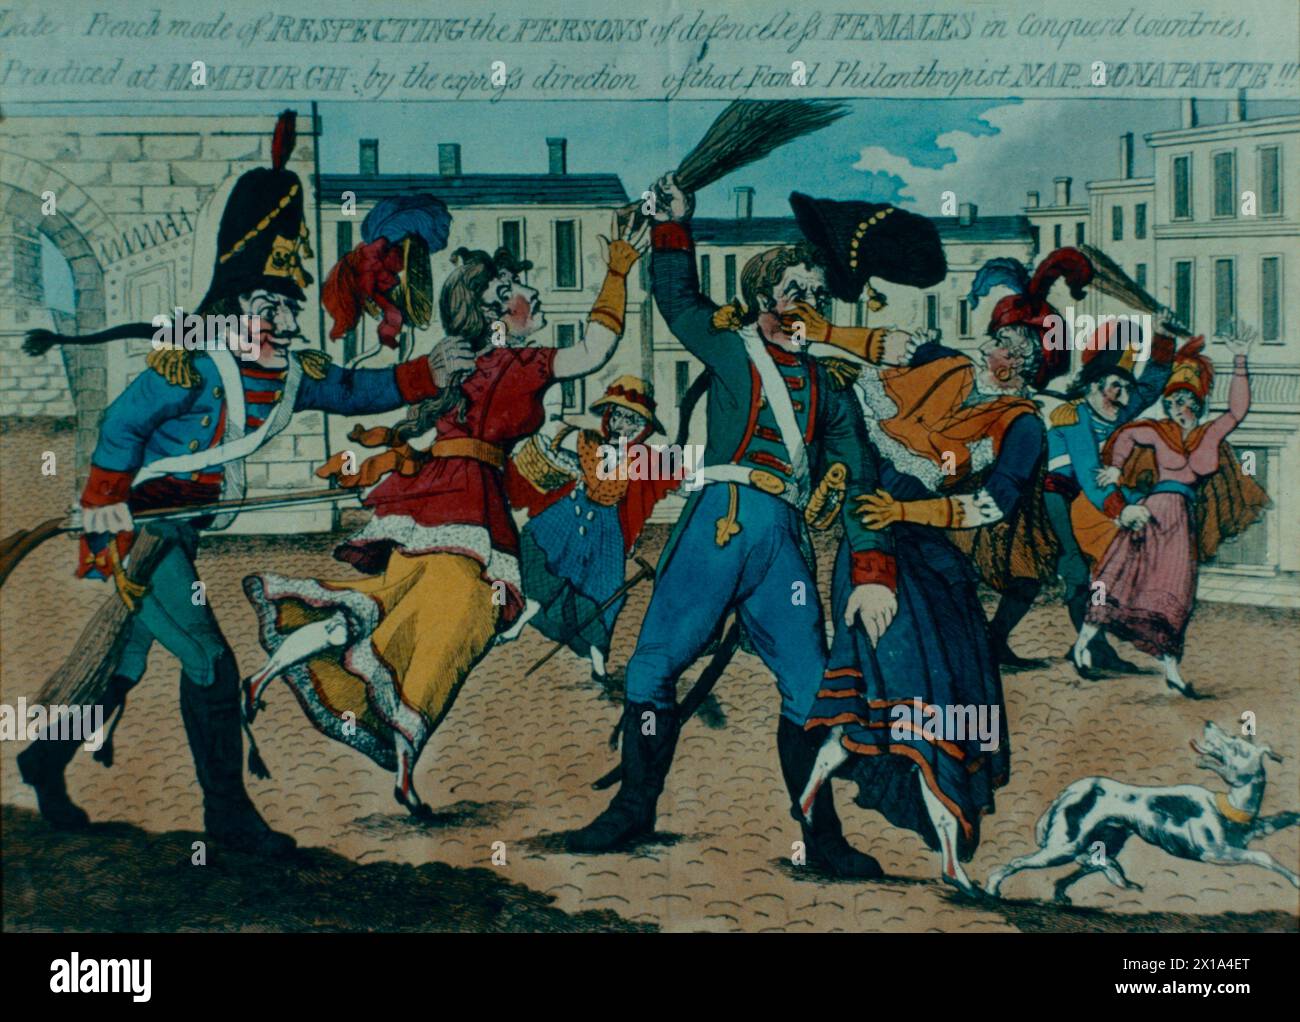 Late mode of respect the Persons of Defeless femelles in Conquiered Countries, dessin animé britannique de 1814 Banque D'Images